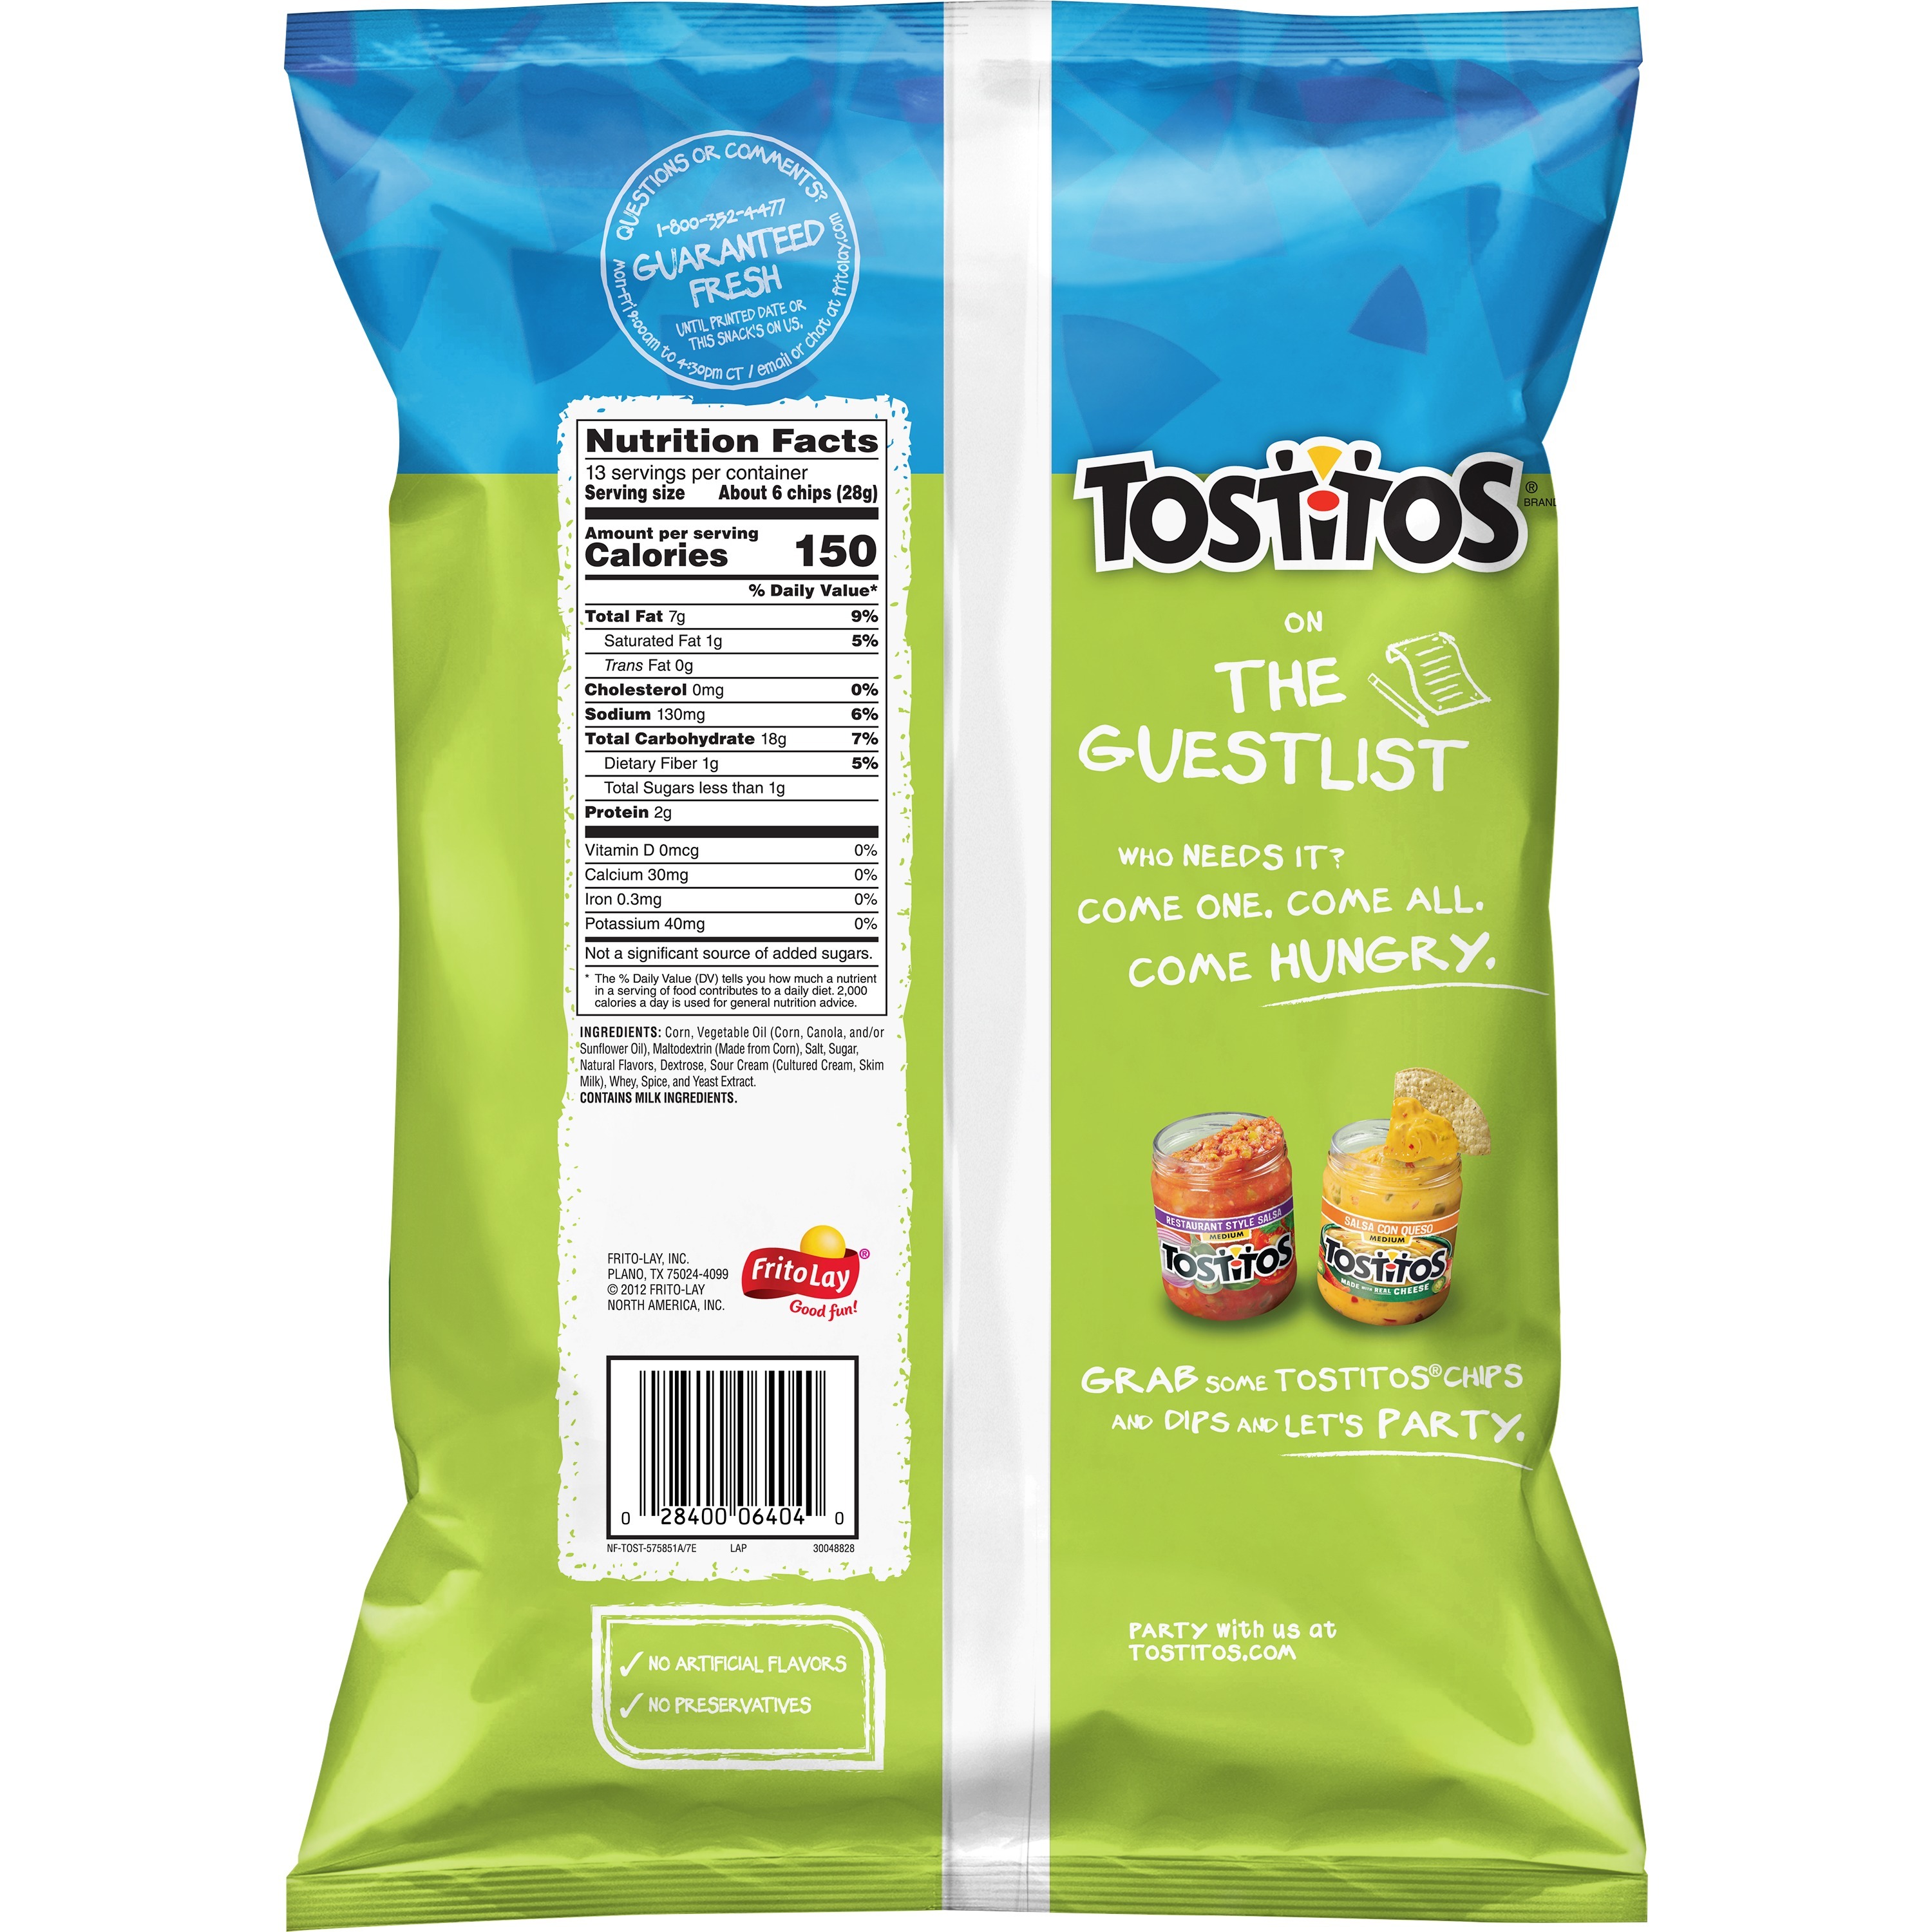 Tostitos Hint of Lime Flavored Tortilla Chips, 13 oz Bag - image 3 of 5